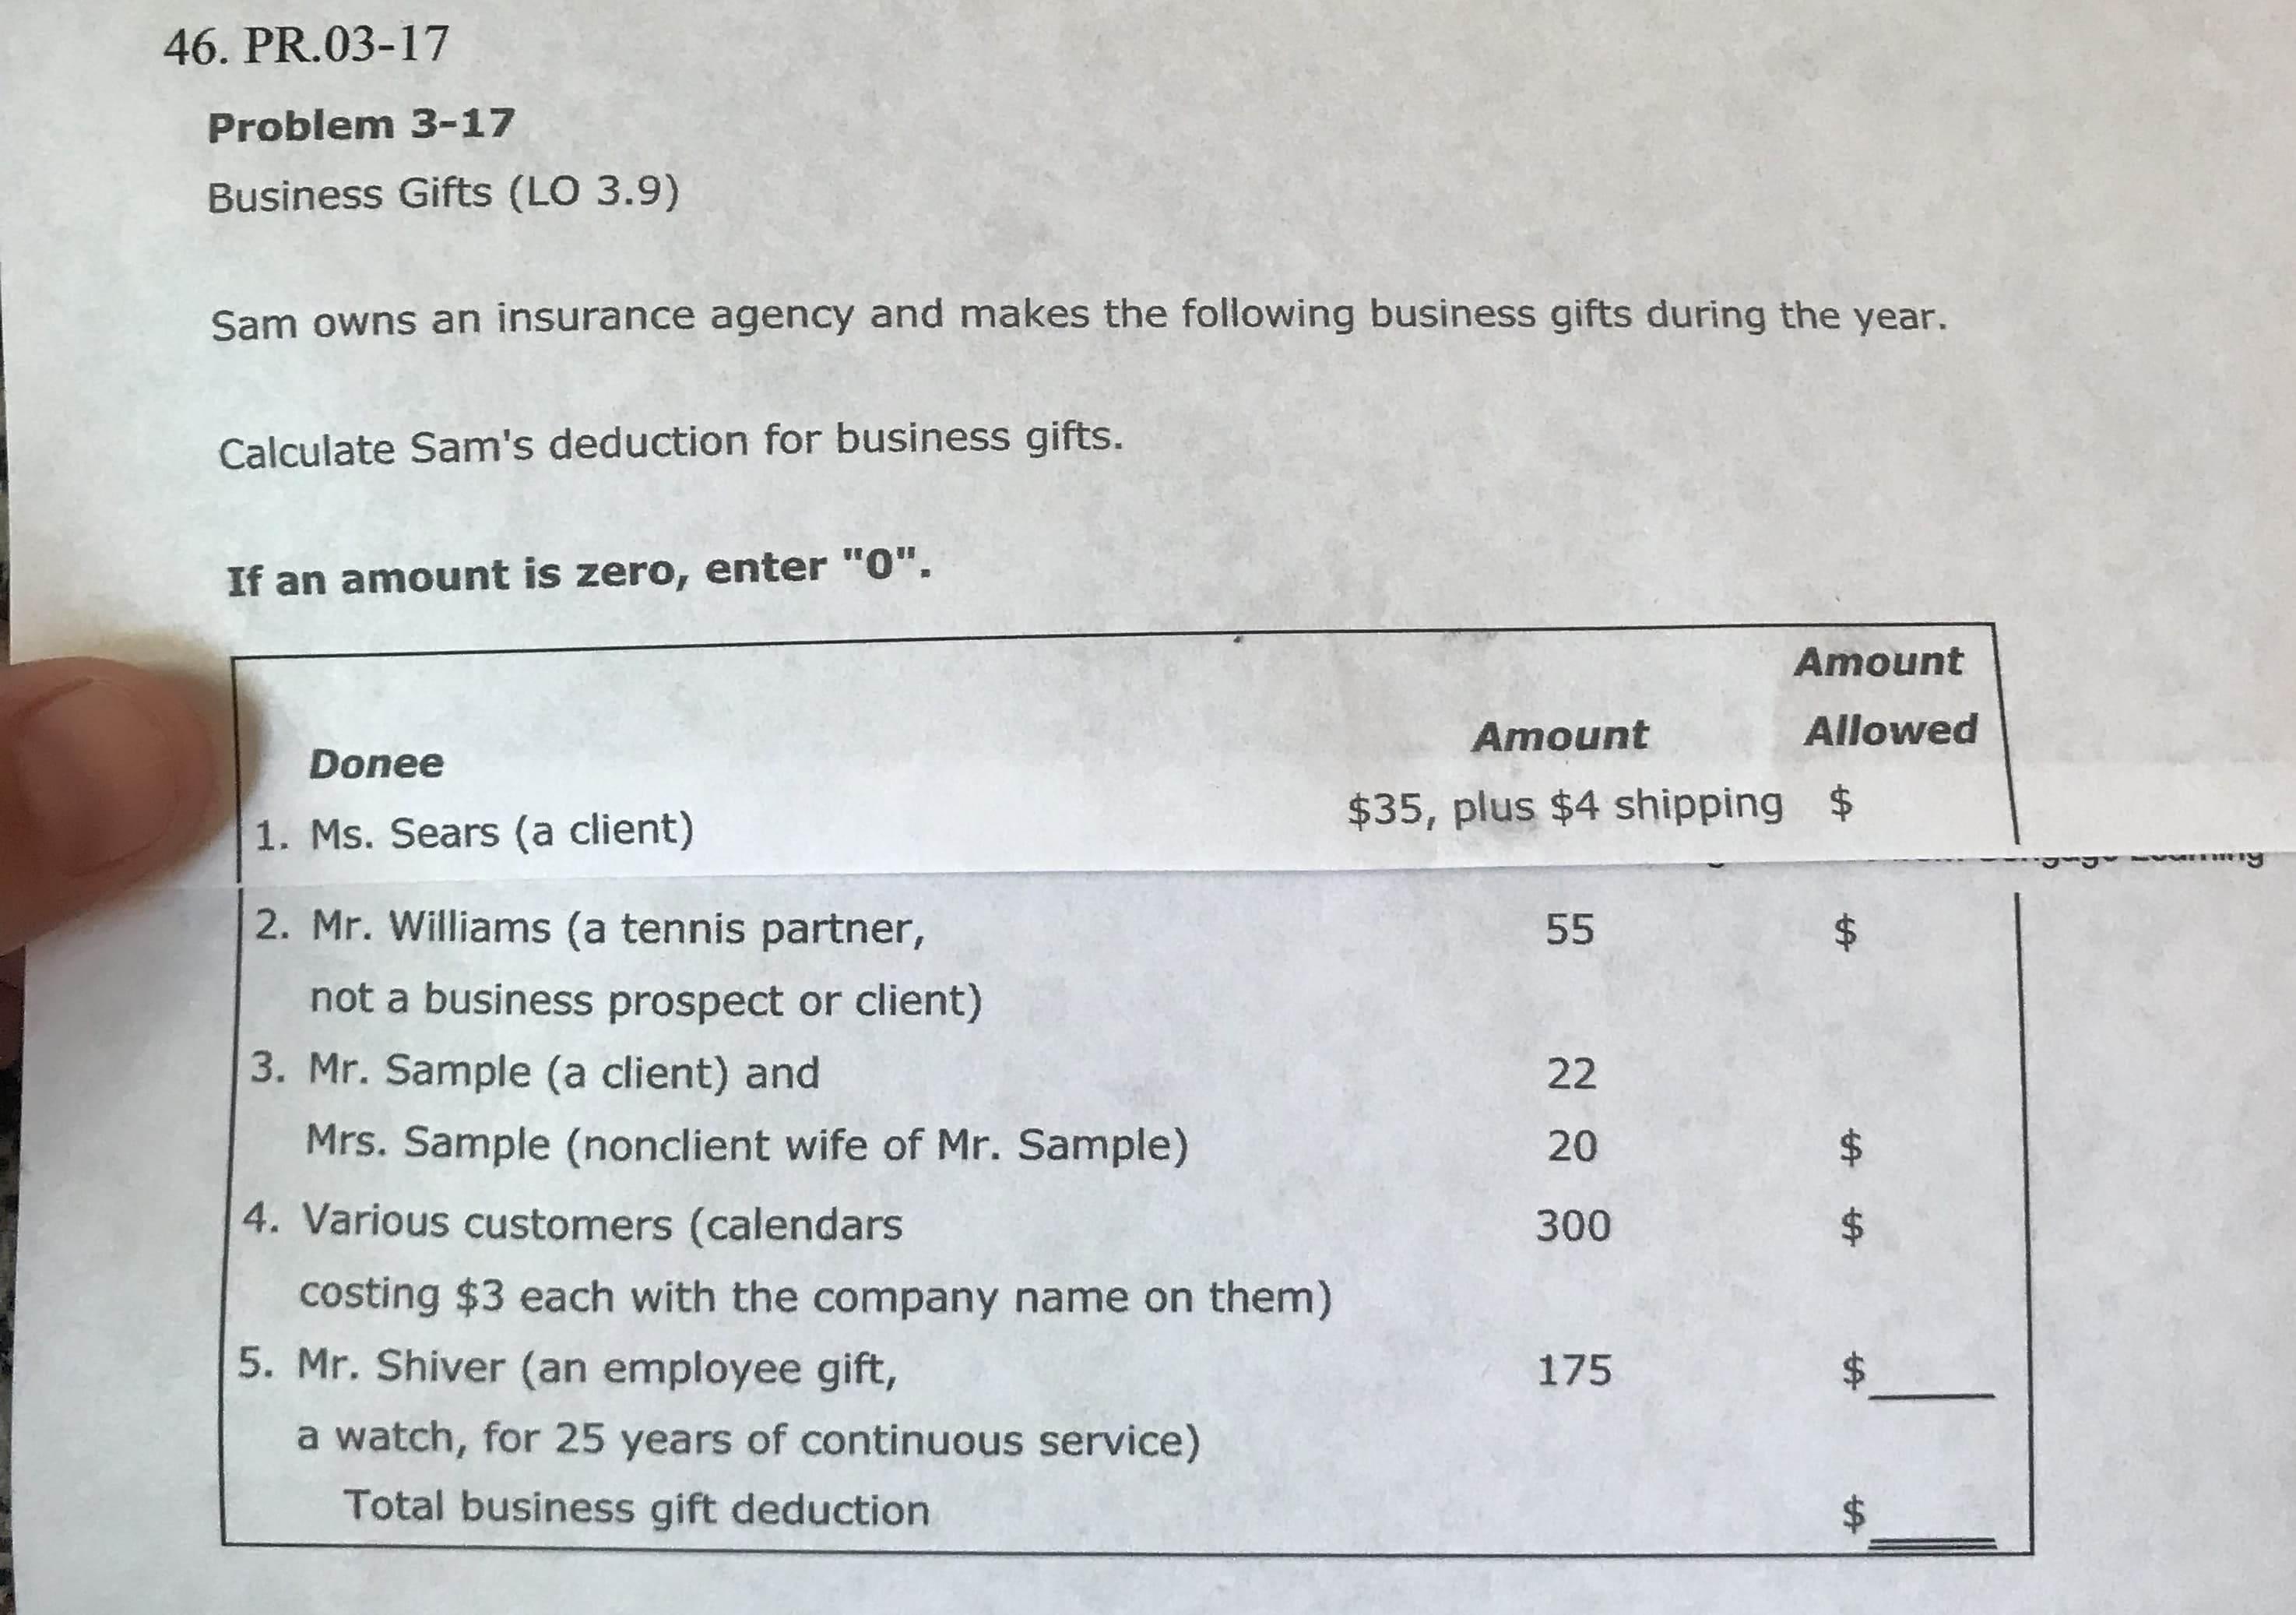 46. PR.03-17
Problem 3-17
Business Gifts (LO 3.9)
Sam owns an insurance agency and makes the following business gifts during the year.
Calculate Sam's deduction for business gifts.
If an amount is zero, enter "0".
Amount
Amount
Allowed
Donee
$35, plus $4 shipping $
1. Ms. Sears (a client)
2. Mr. Williams (a tennis partner,
55
not a business prospect or client)
3. Mr. Sample (a client) and
22
Mrs. Sample (nonclient wife of Mr. Sample)
20
4. Various customers (calendars
300
costing $3 each with the company name on them)
5. Mr. Shiver (an employee gift,
175
a watch, for 25 years of continuous service)
Total business gift deduction
%24
%24
%24
%24
%24
